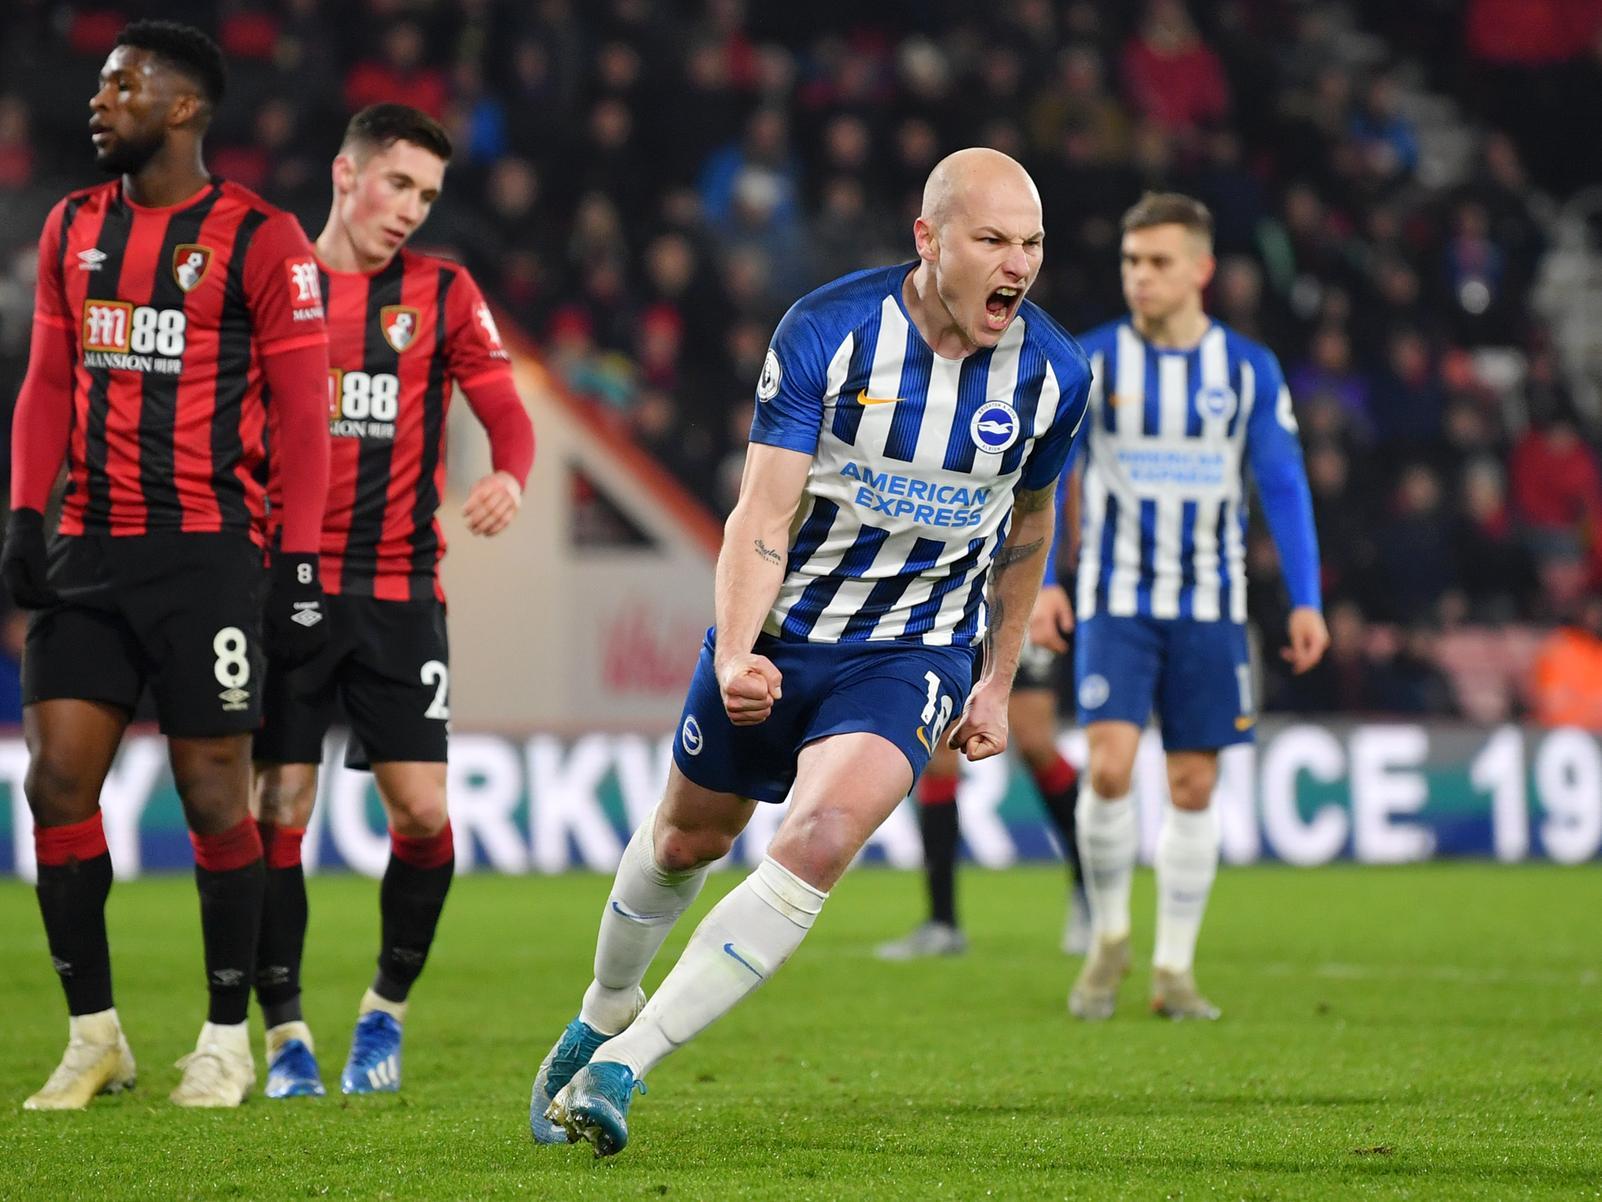 Brighton & Hove Albion look set to confirm the signing of Aaron Mooy on a 5 million permanent deal, with the Australia international set to leave Huddersfield Town. (Telegraph)